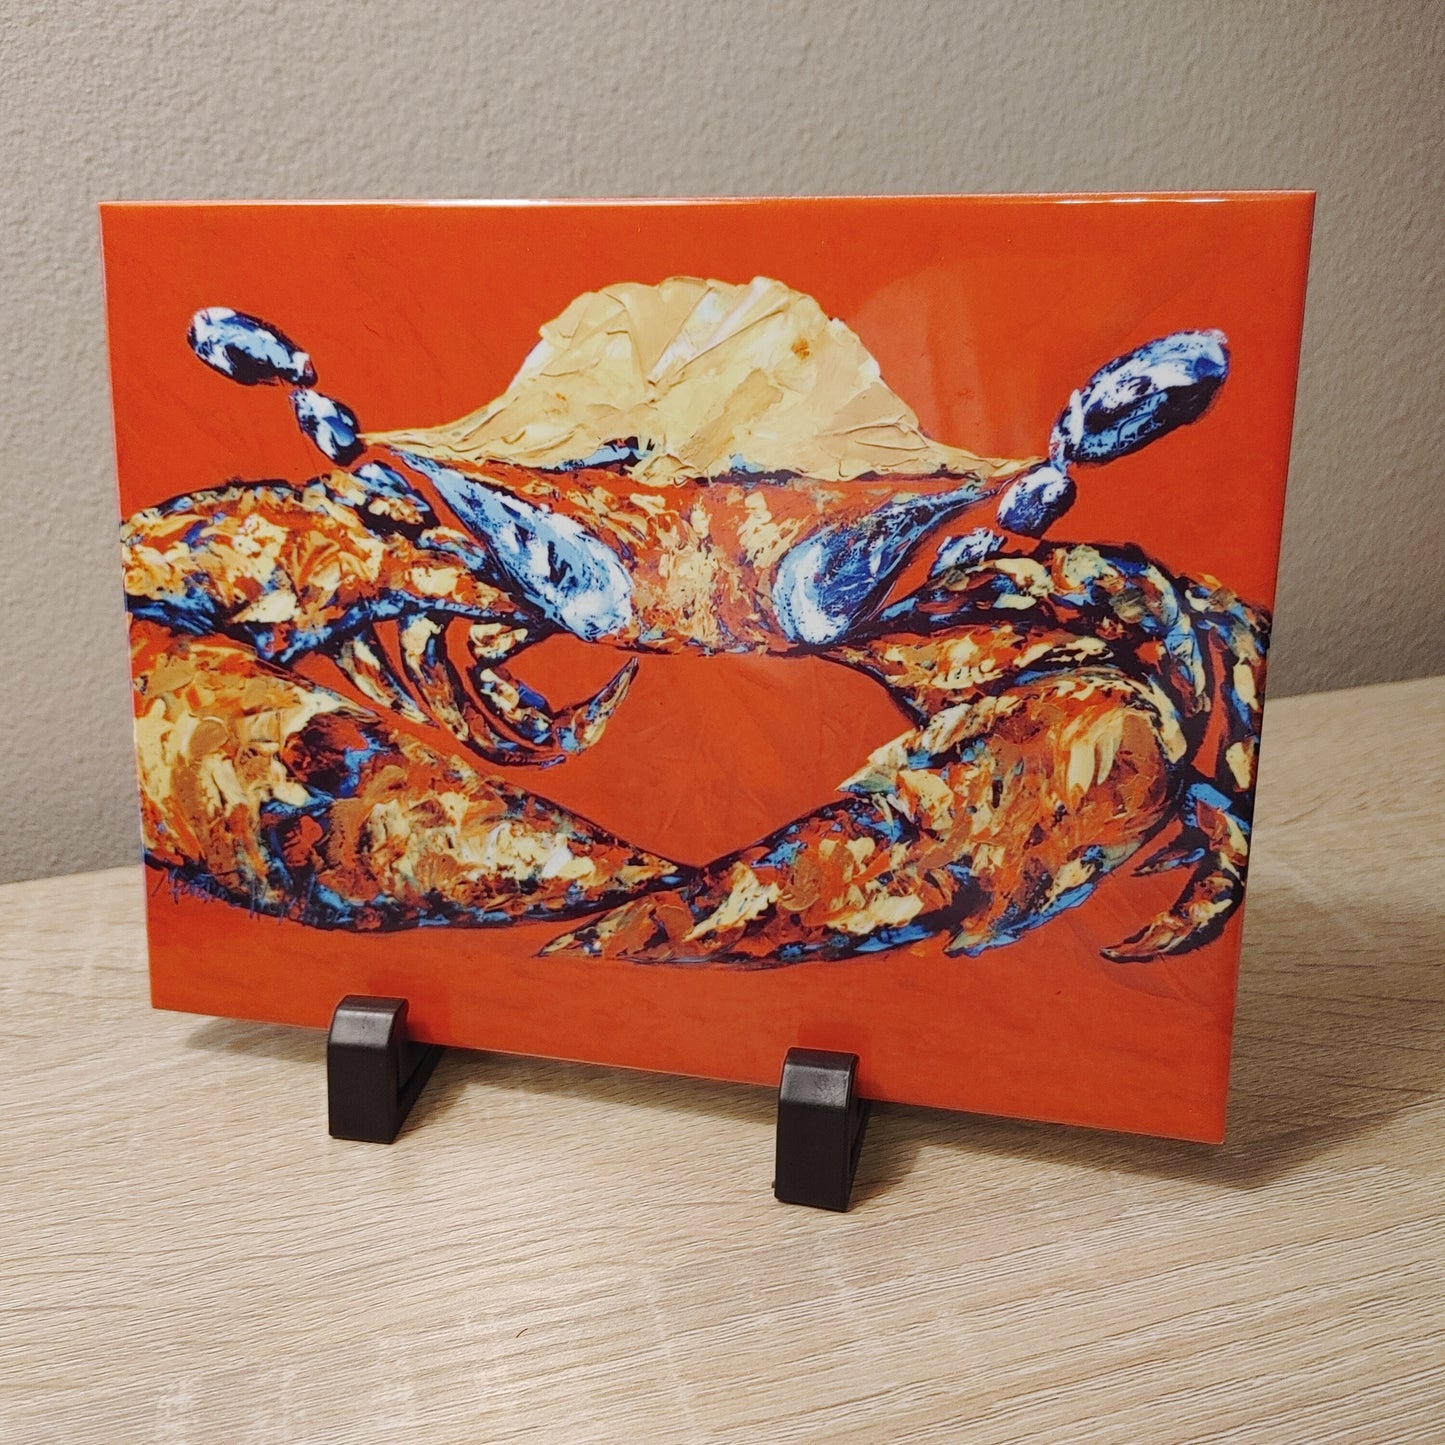 Fat and Sassy 6x8 Ceramic Tile Reproduction of Crab